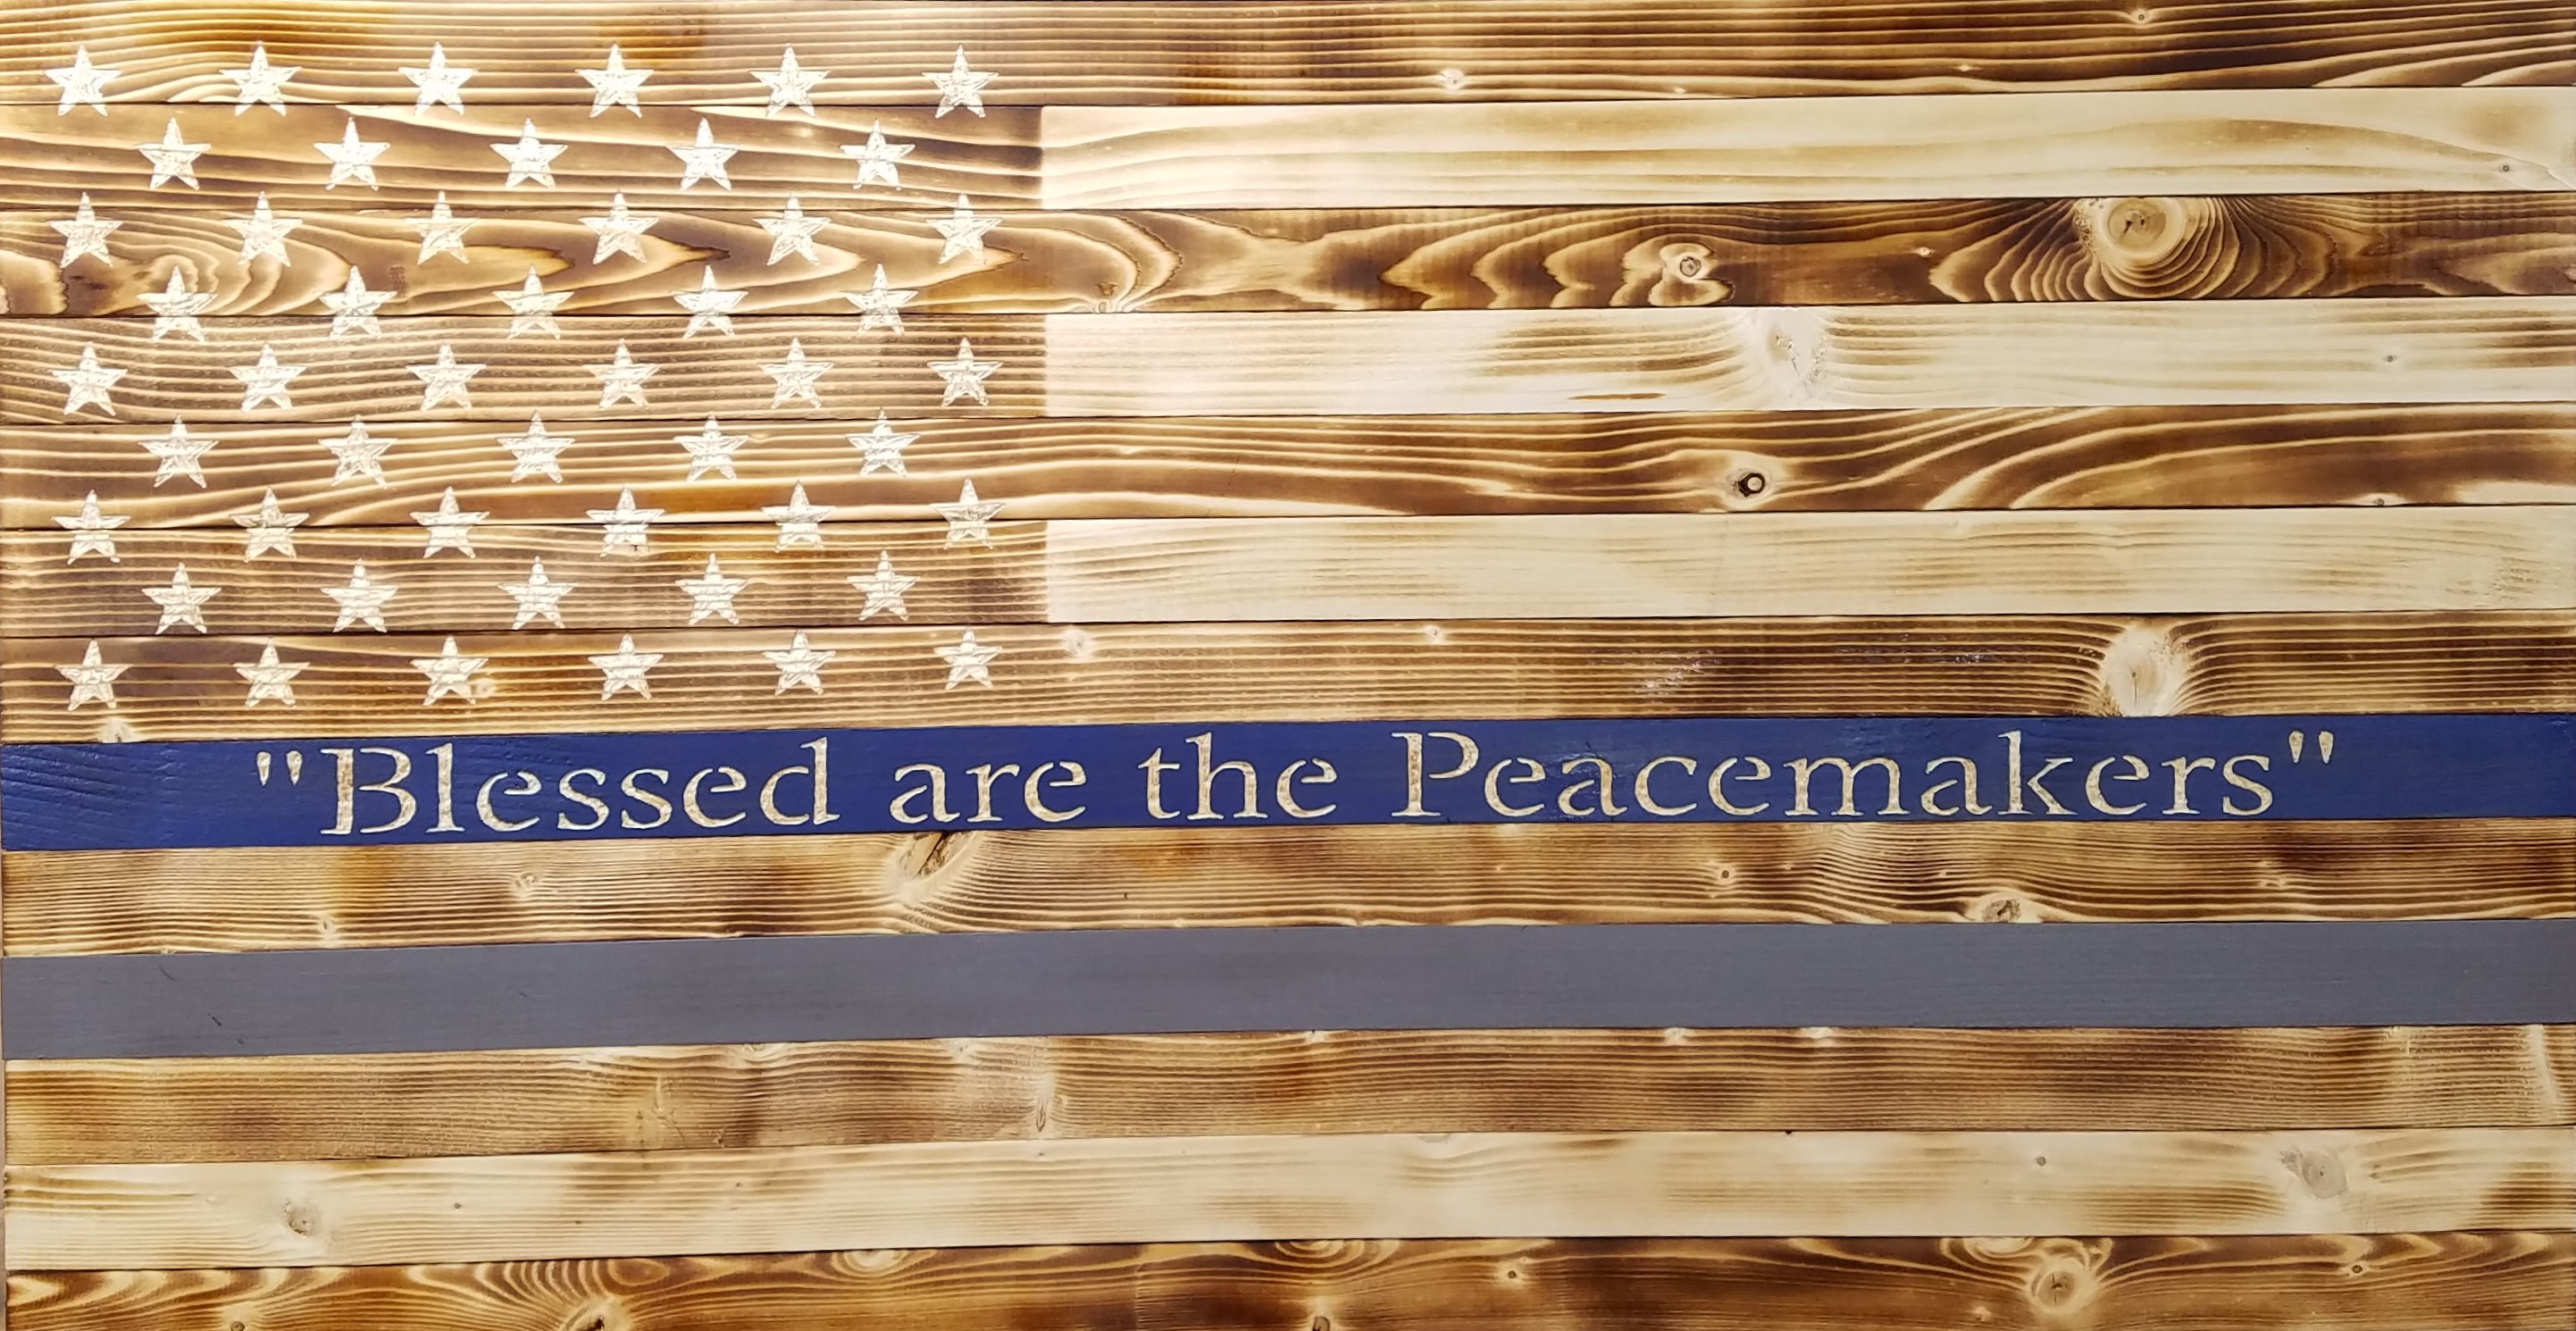 Picture of rustic wooden flag with gray stripe and blue stripe with Bible verse.